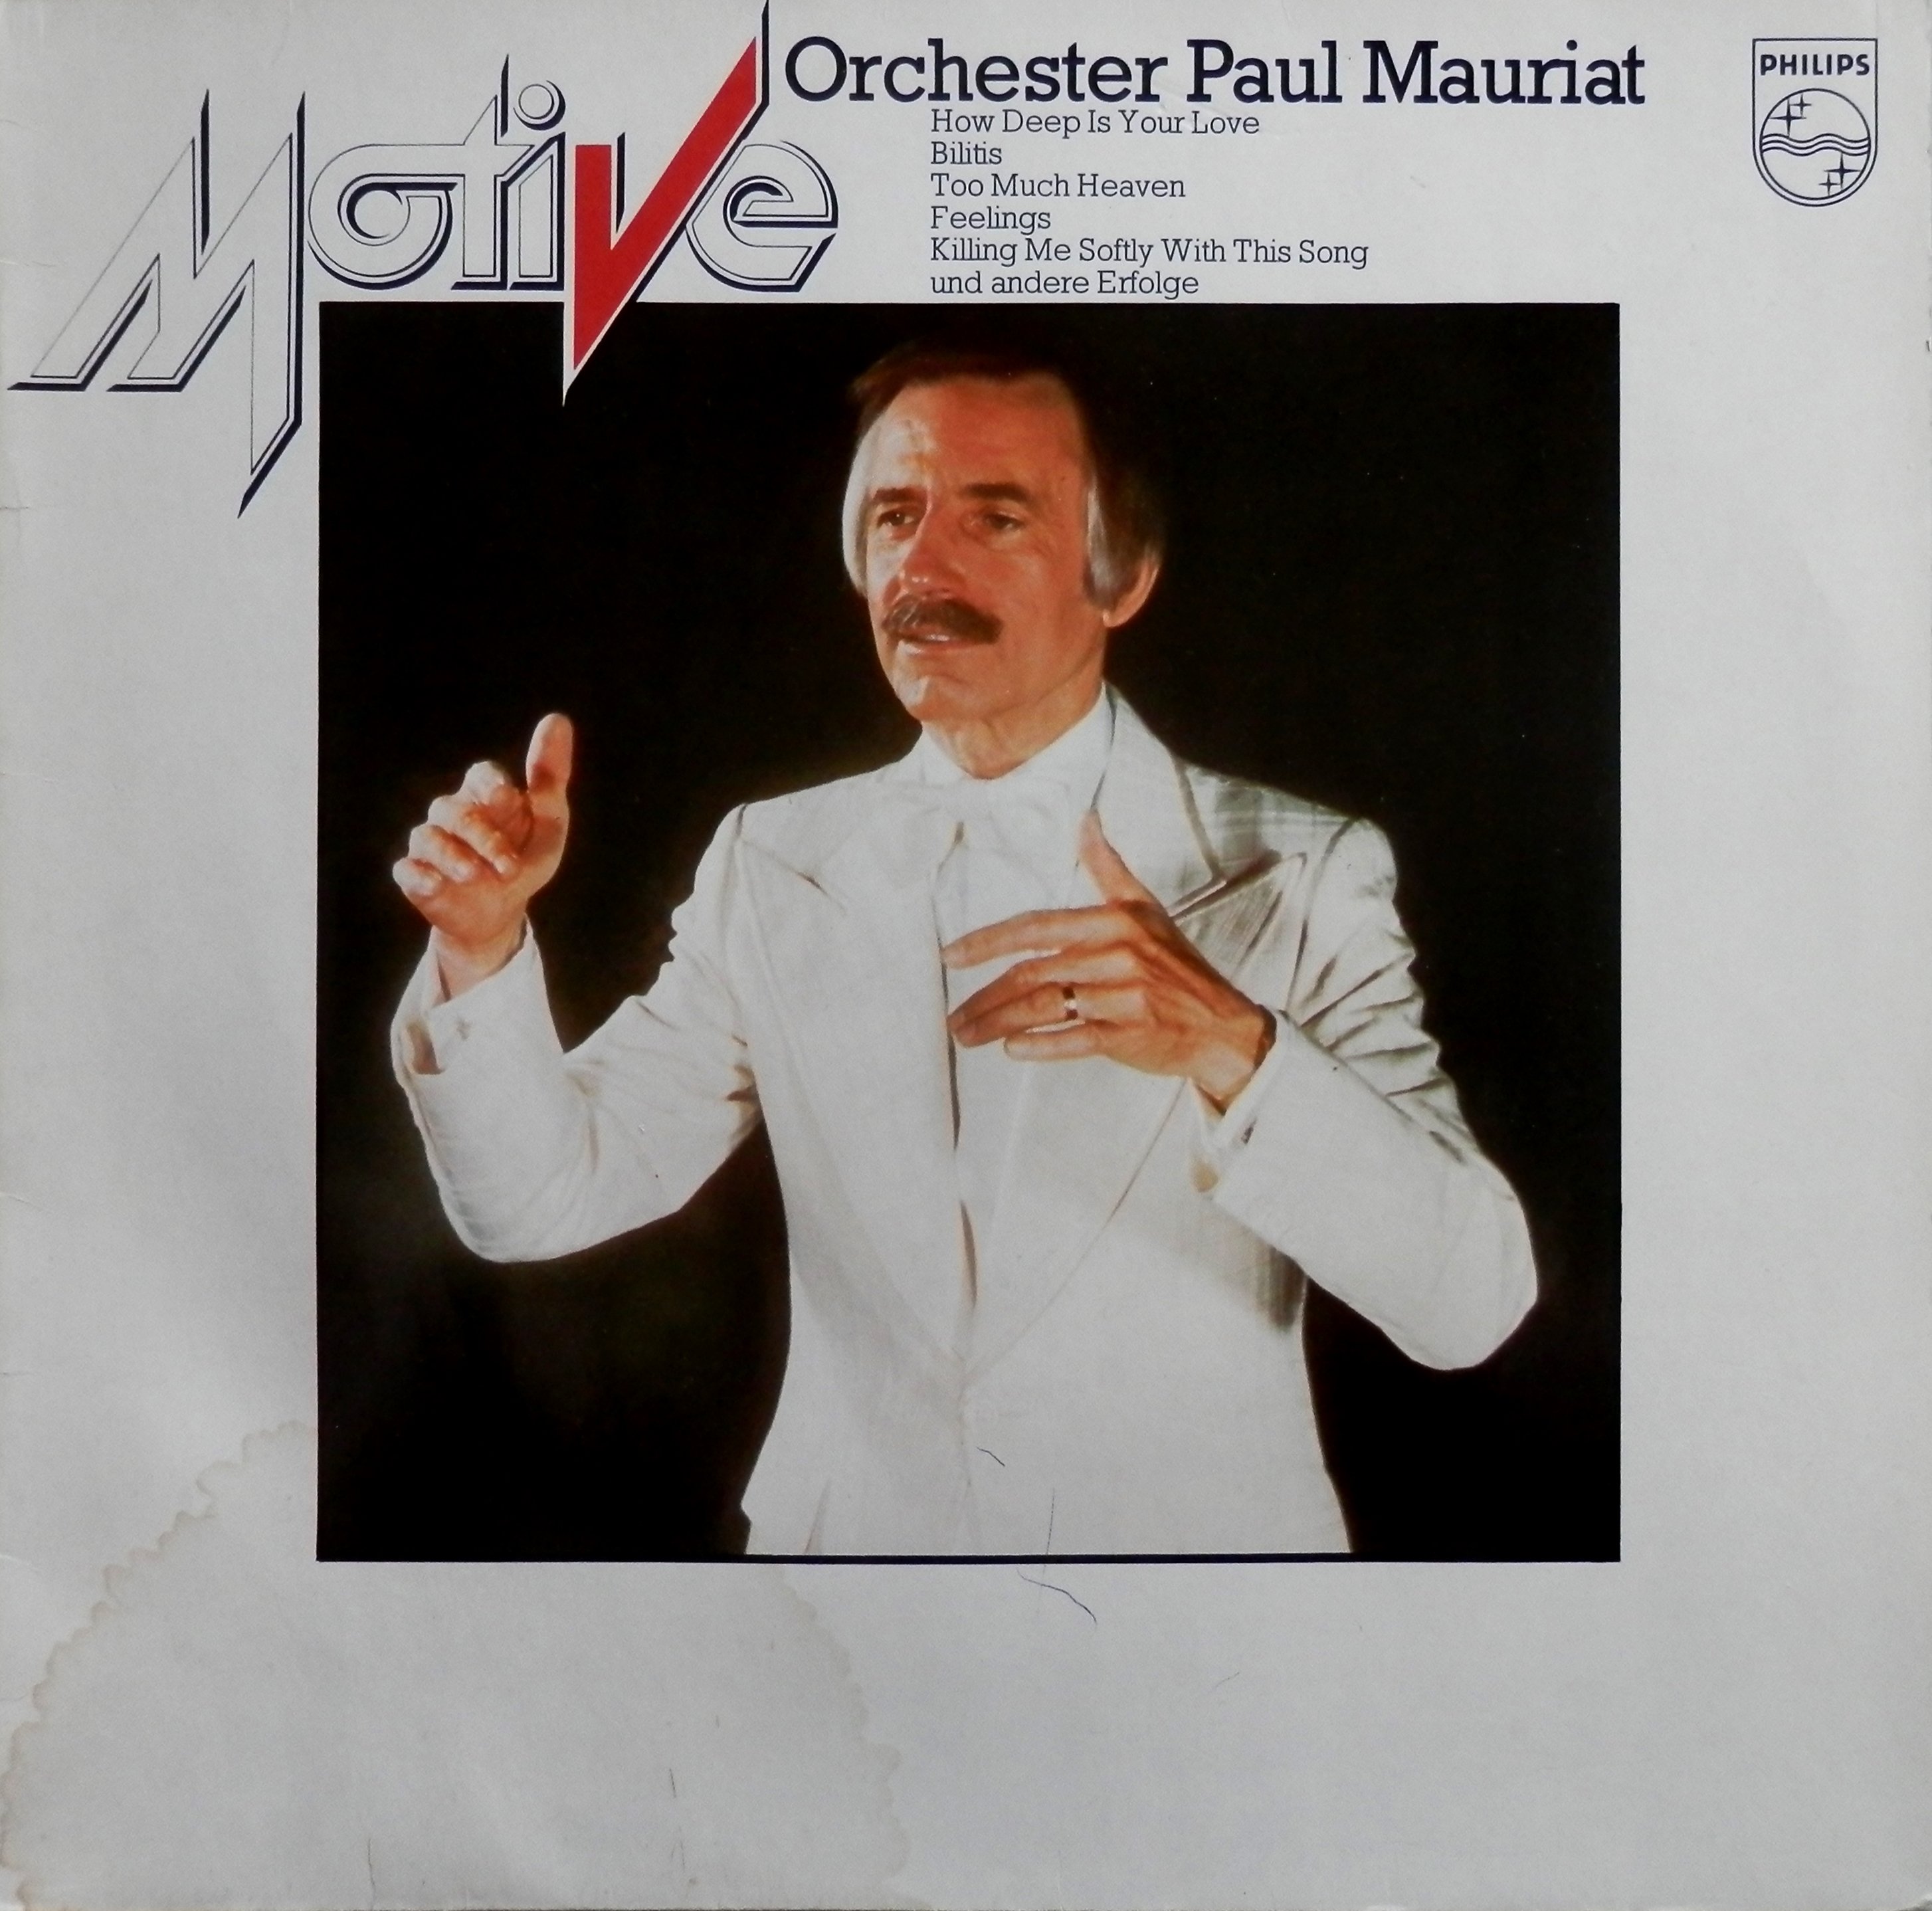 Paul Mauriat too much Heaven 1979